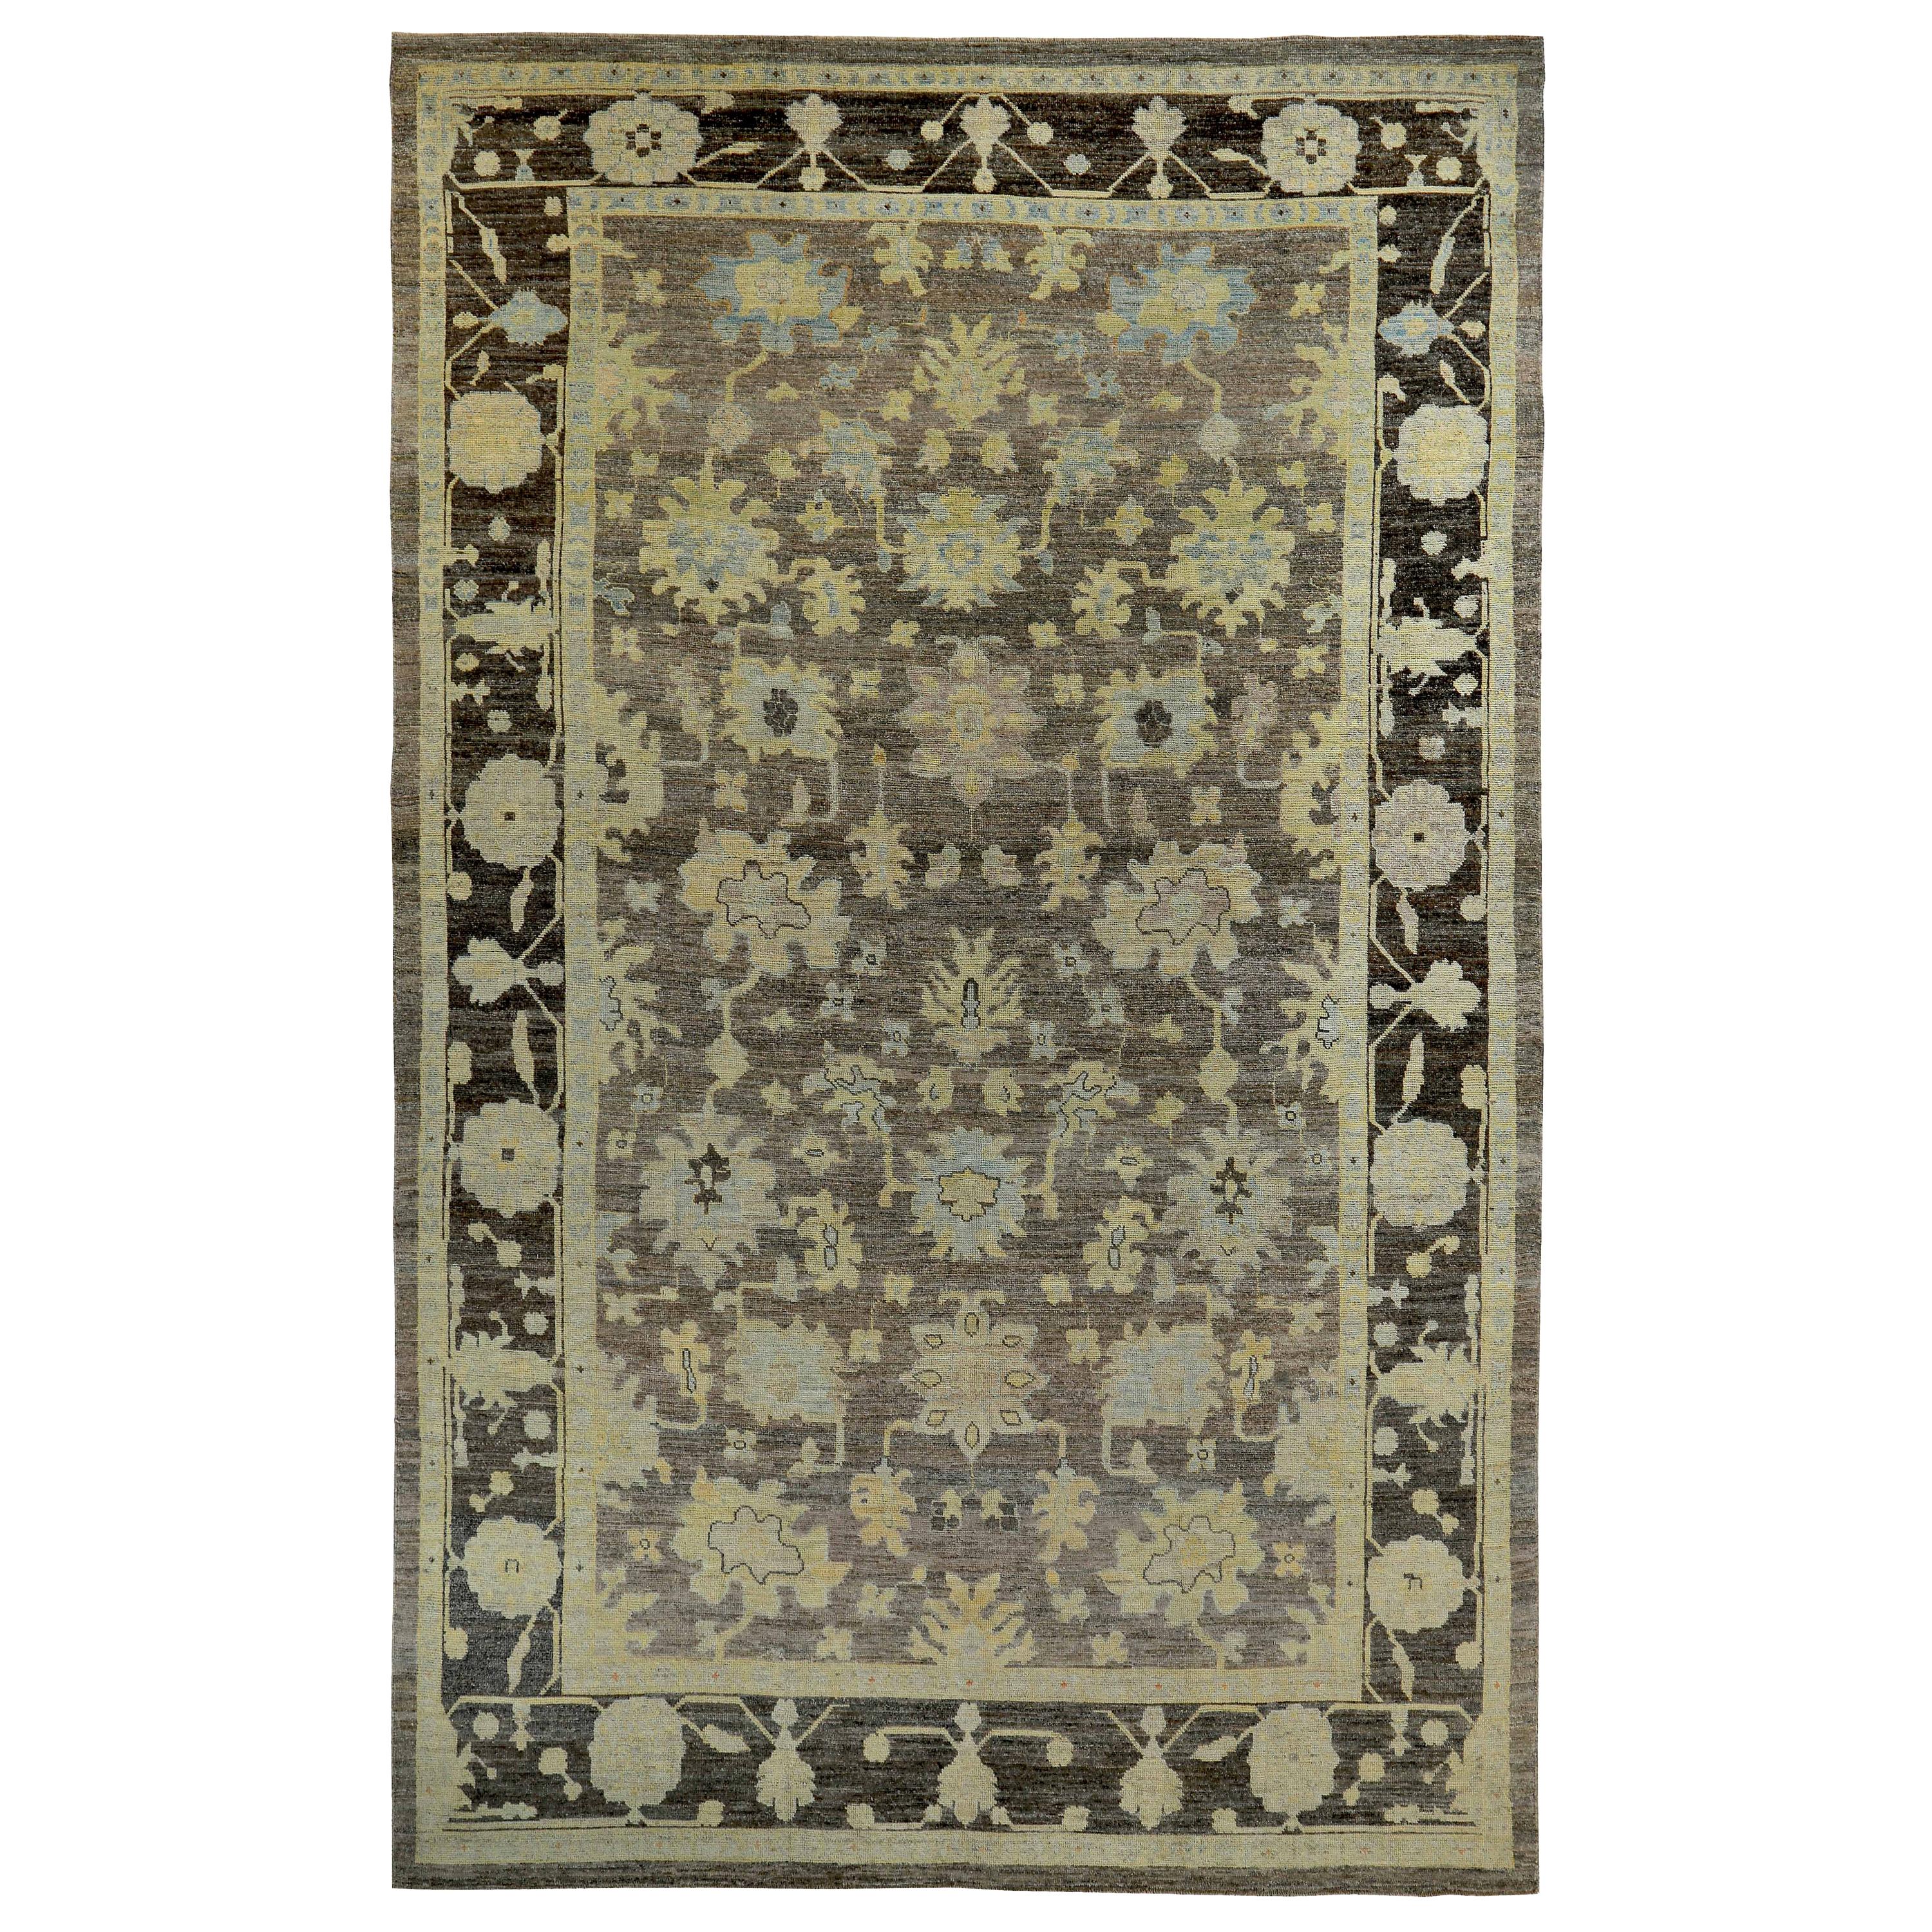 New Turkish Oushak Rug with Ivory and Blue Floral Details on Brown Field